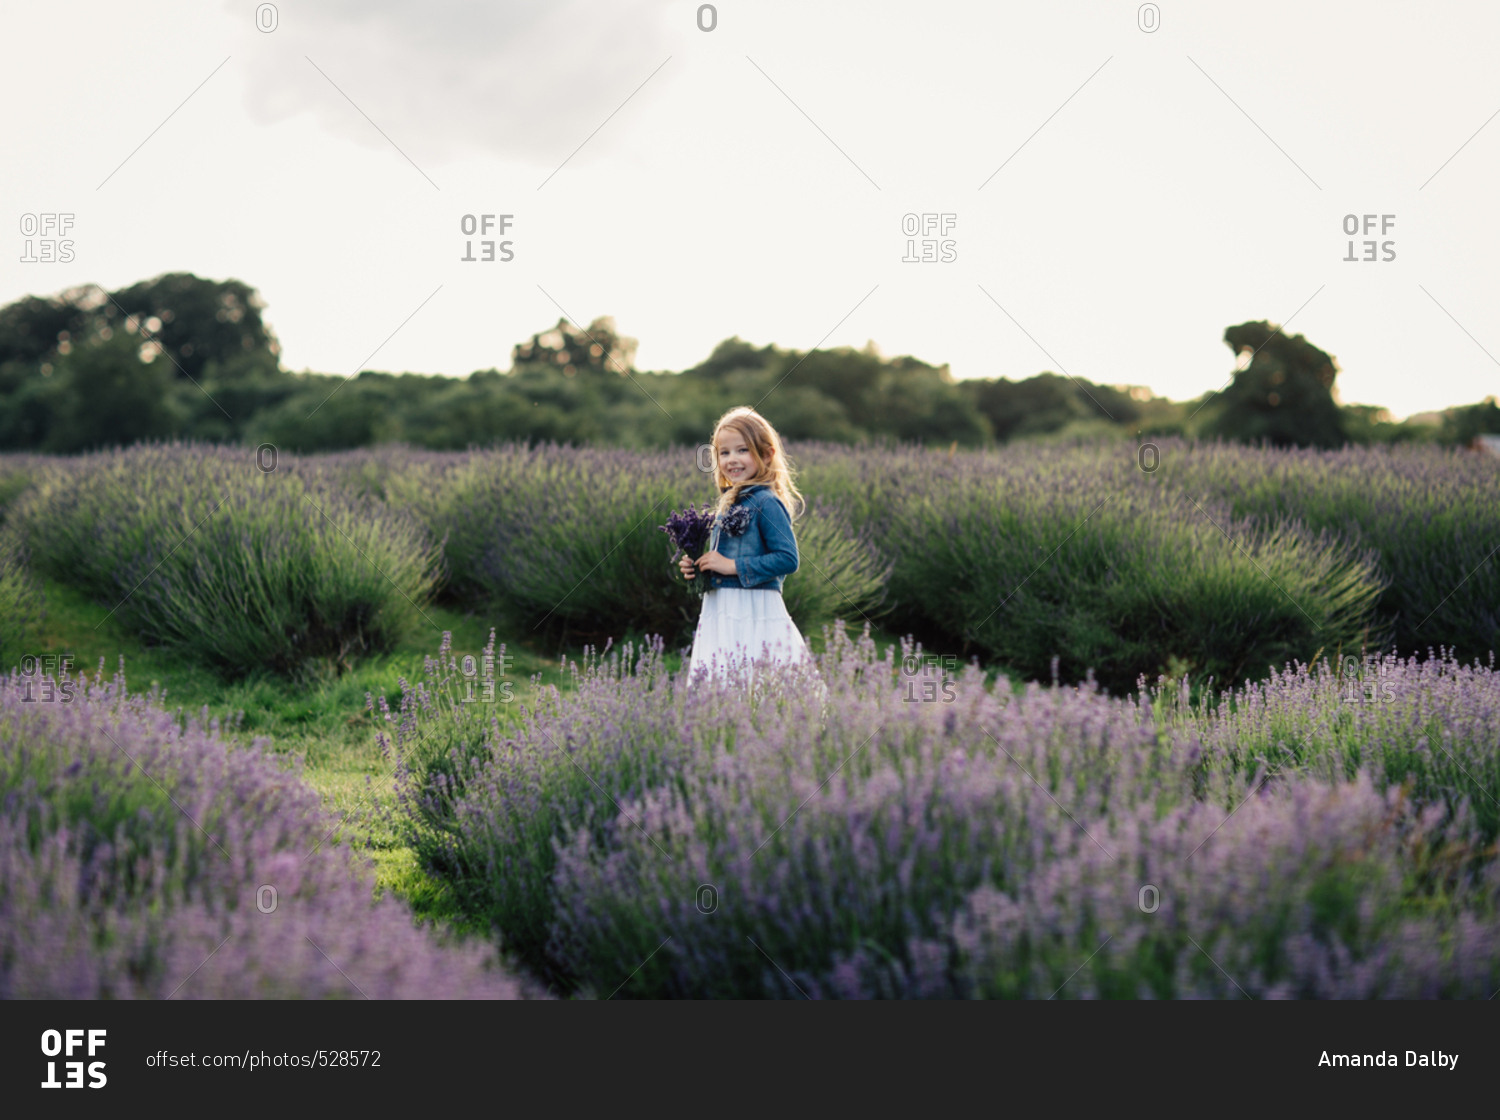 Smiling girl holding a bunch of freshly picked lavender flowers standing in field